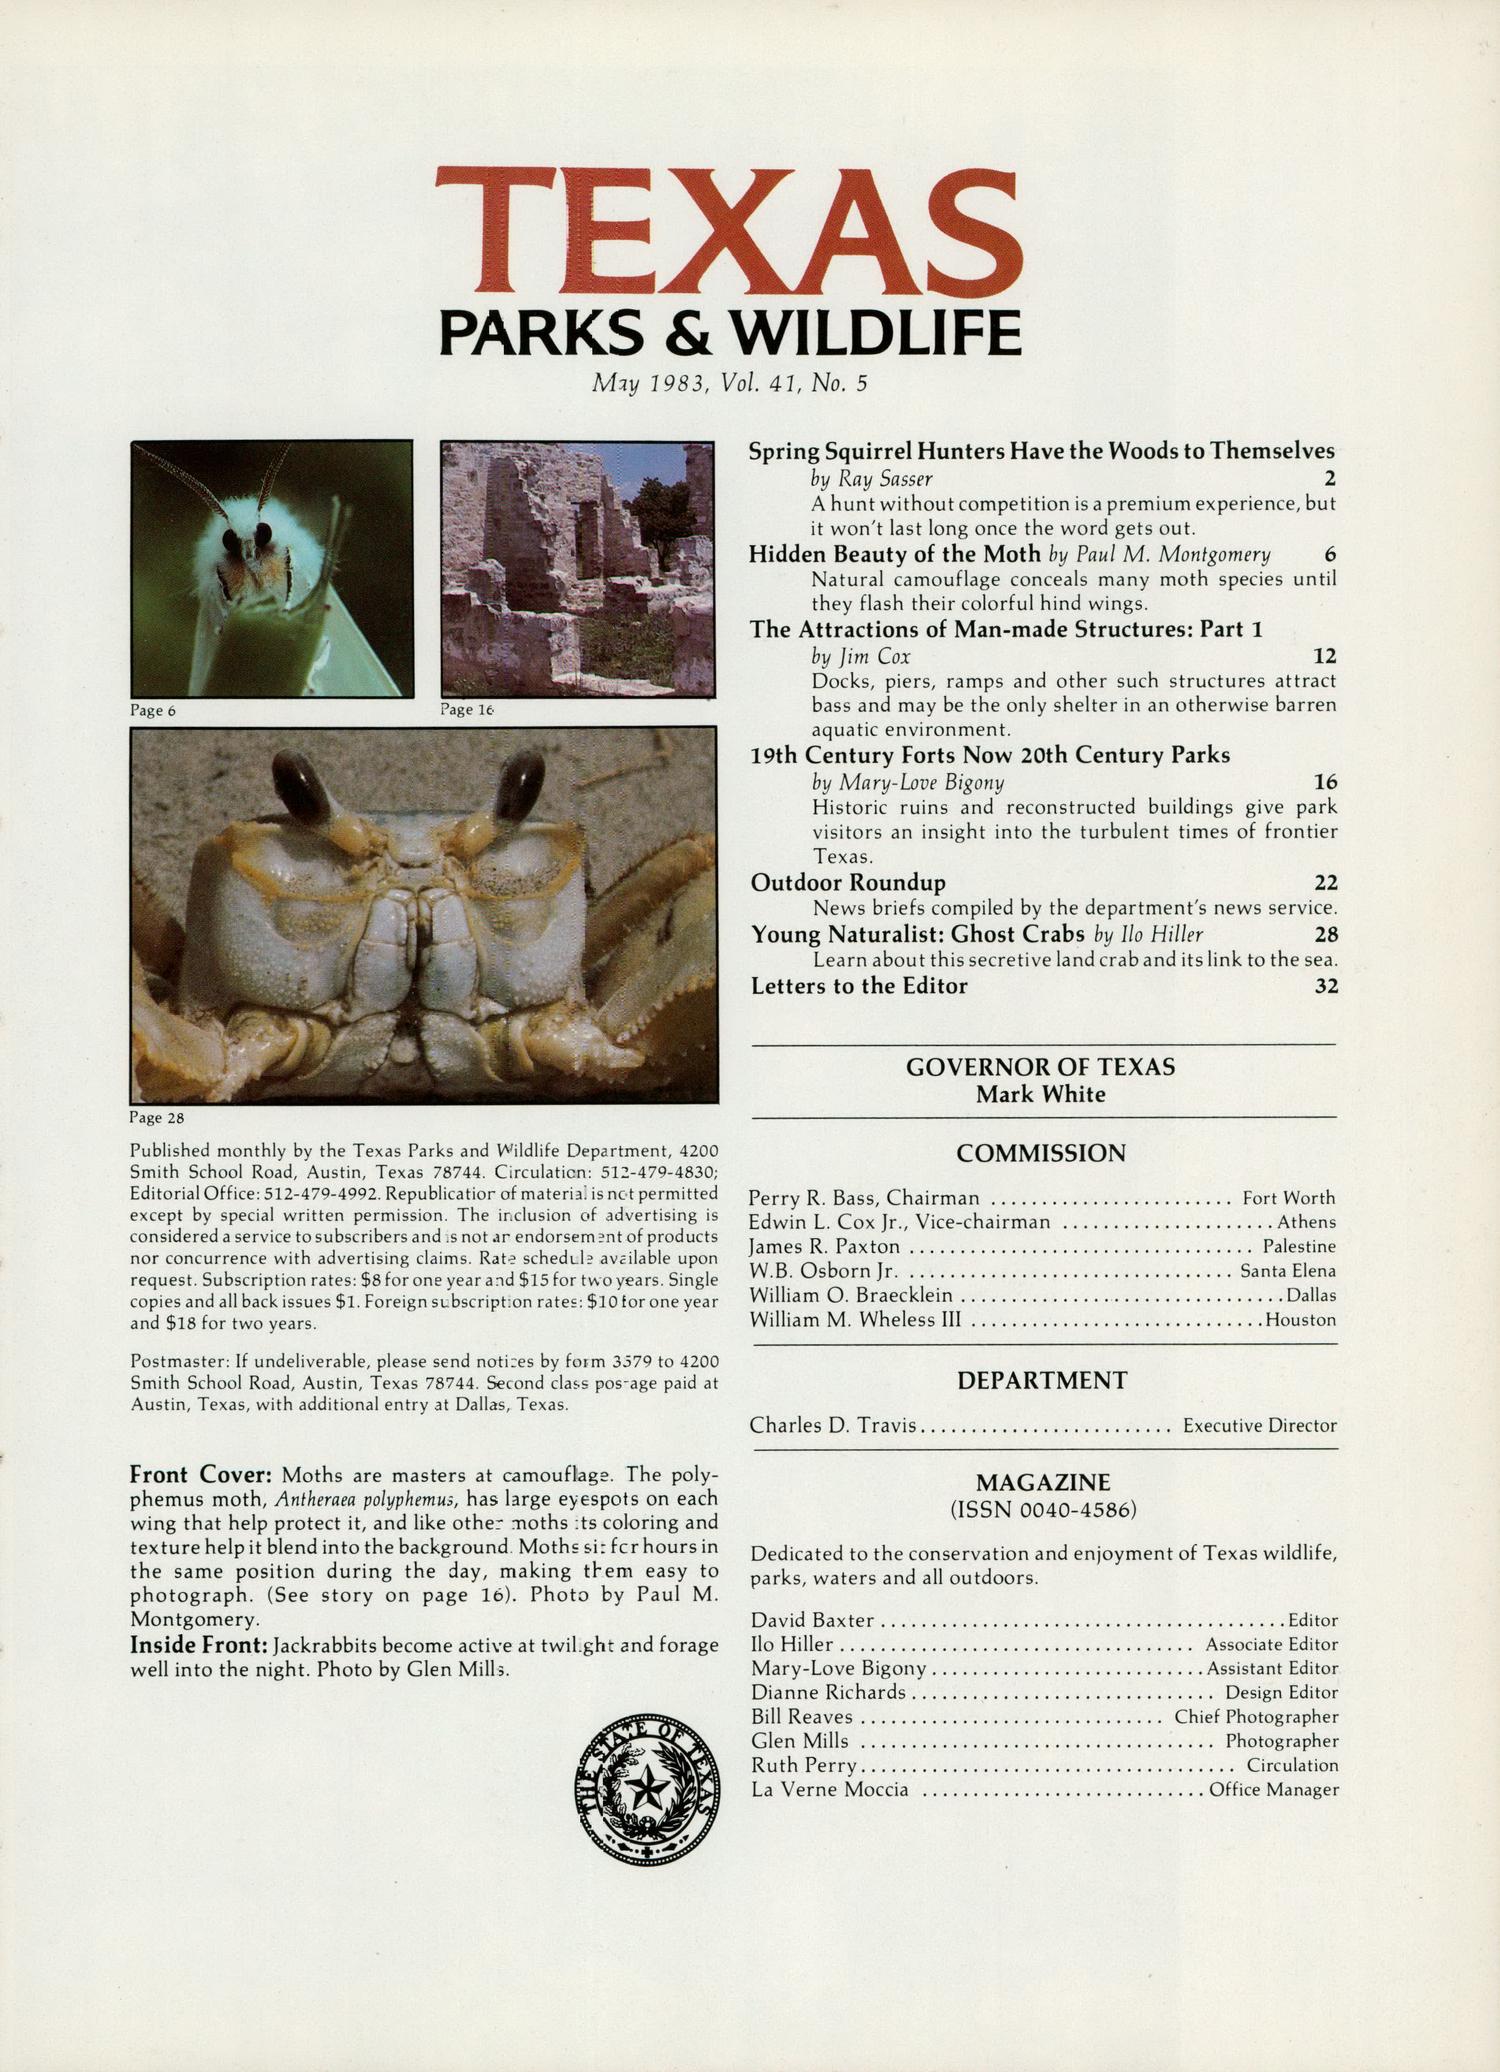 Texas Parks & Wildlife, Volume 41, Number 5, May 1983
                                                
                                                    CREDIT PAGE
                                                